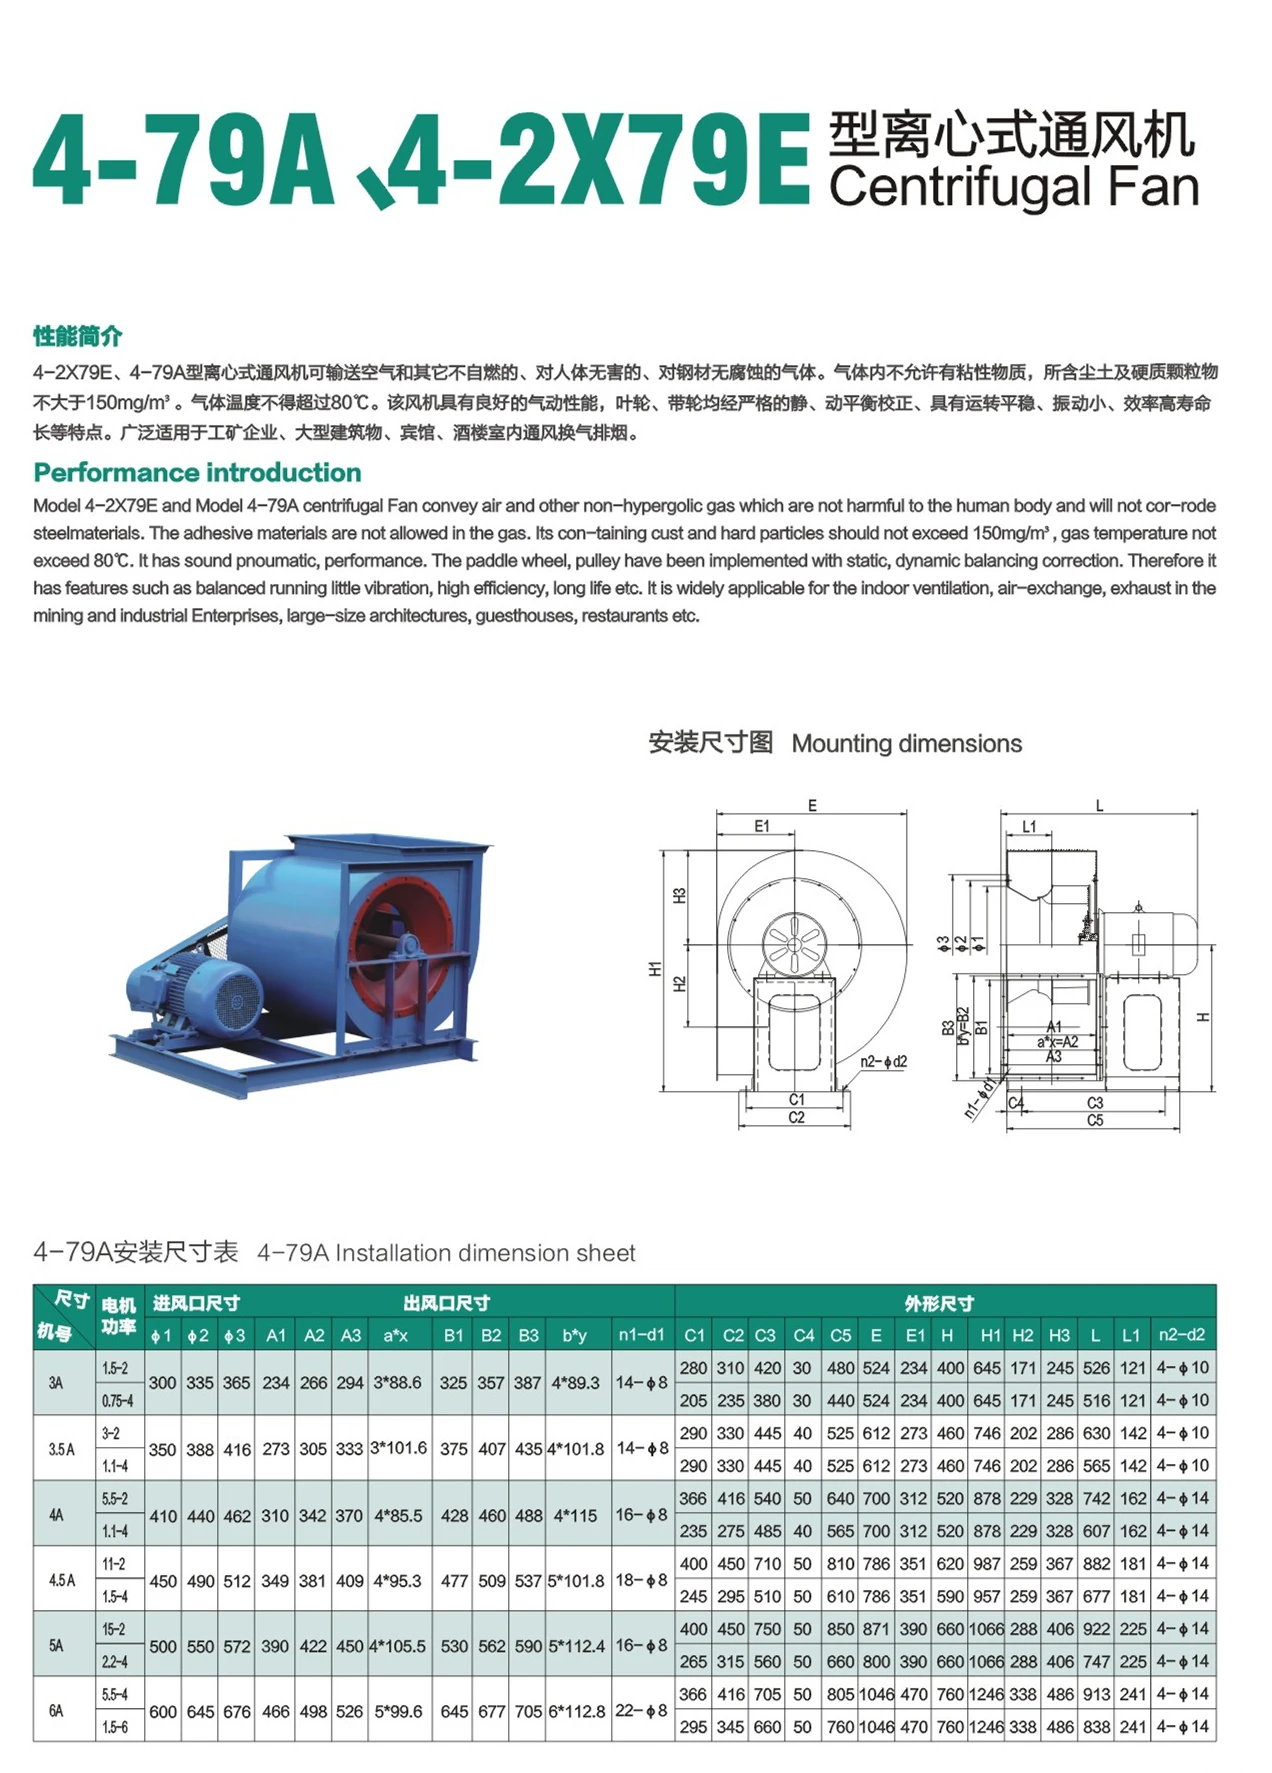 Large air volume industrial 4-79A/4-2X79E centrifugal fan with low sound